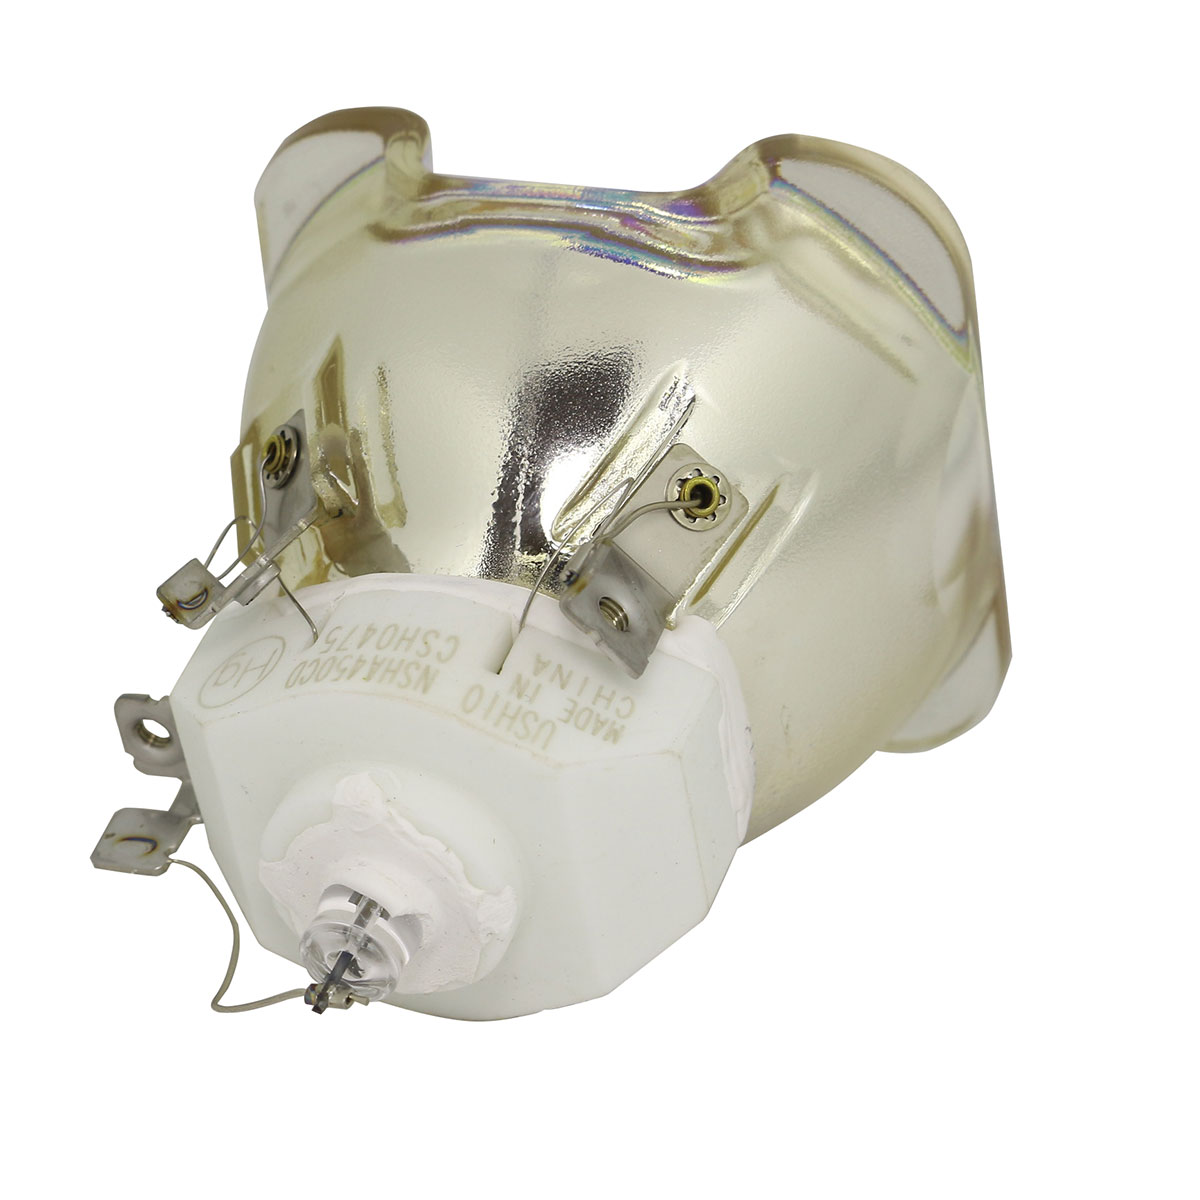 Ushio NSH Replacement Bulb for the Christie Digital Boxer 2K30 Projector - image 5 of 8